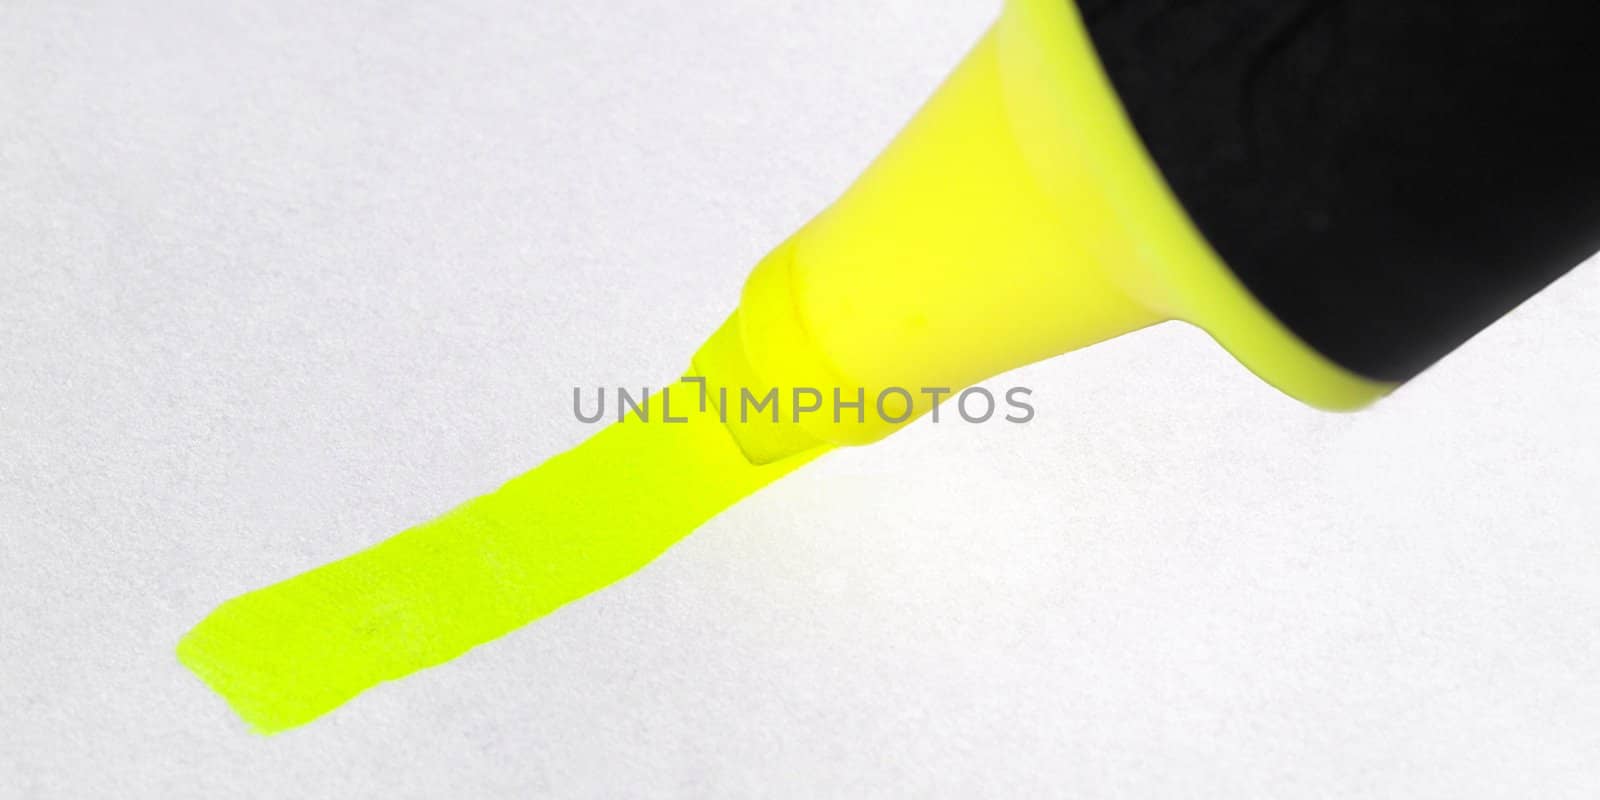 Highlighter or marker to highlight text on paper